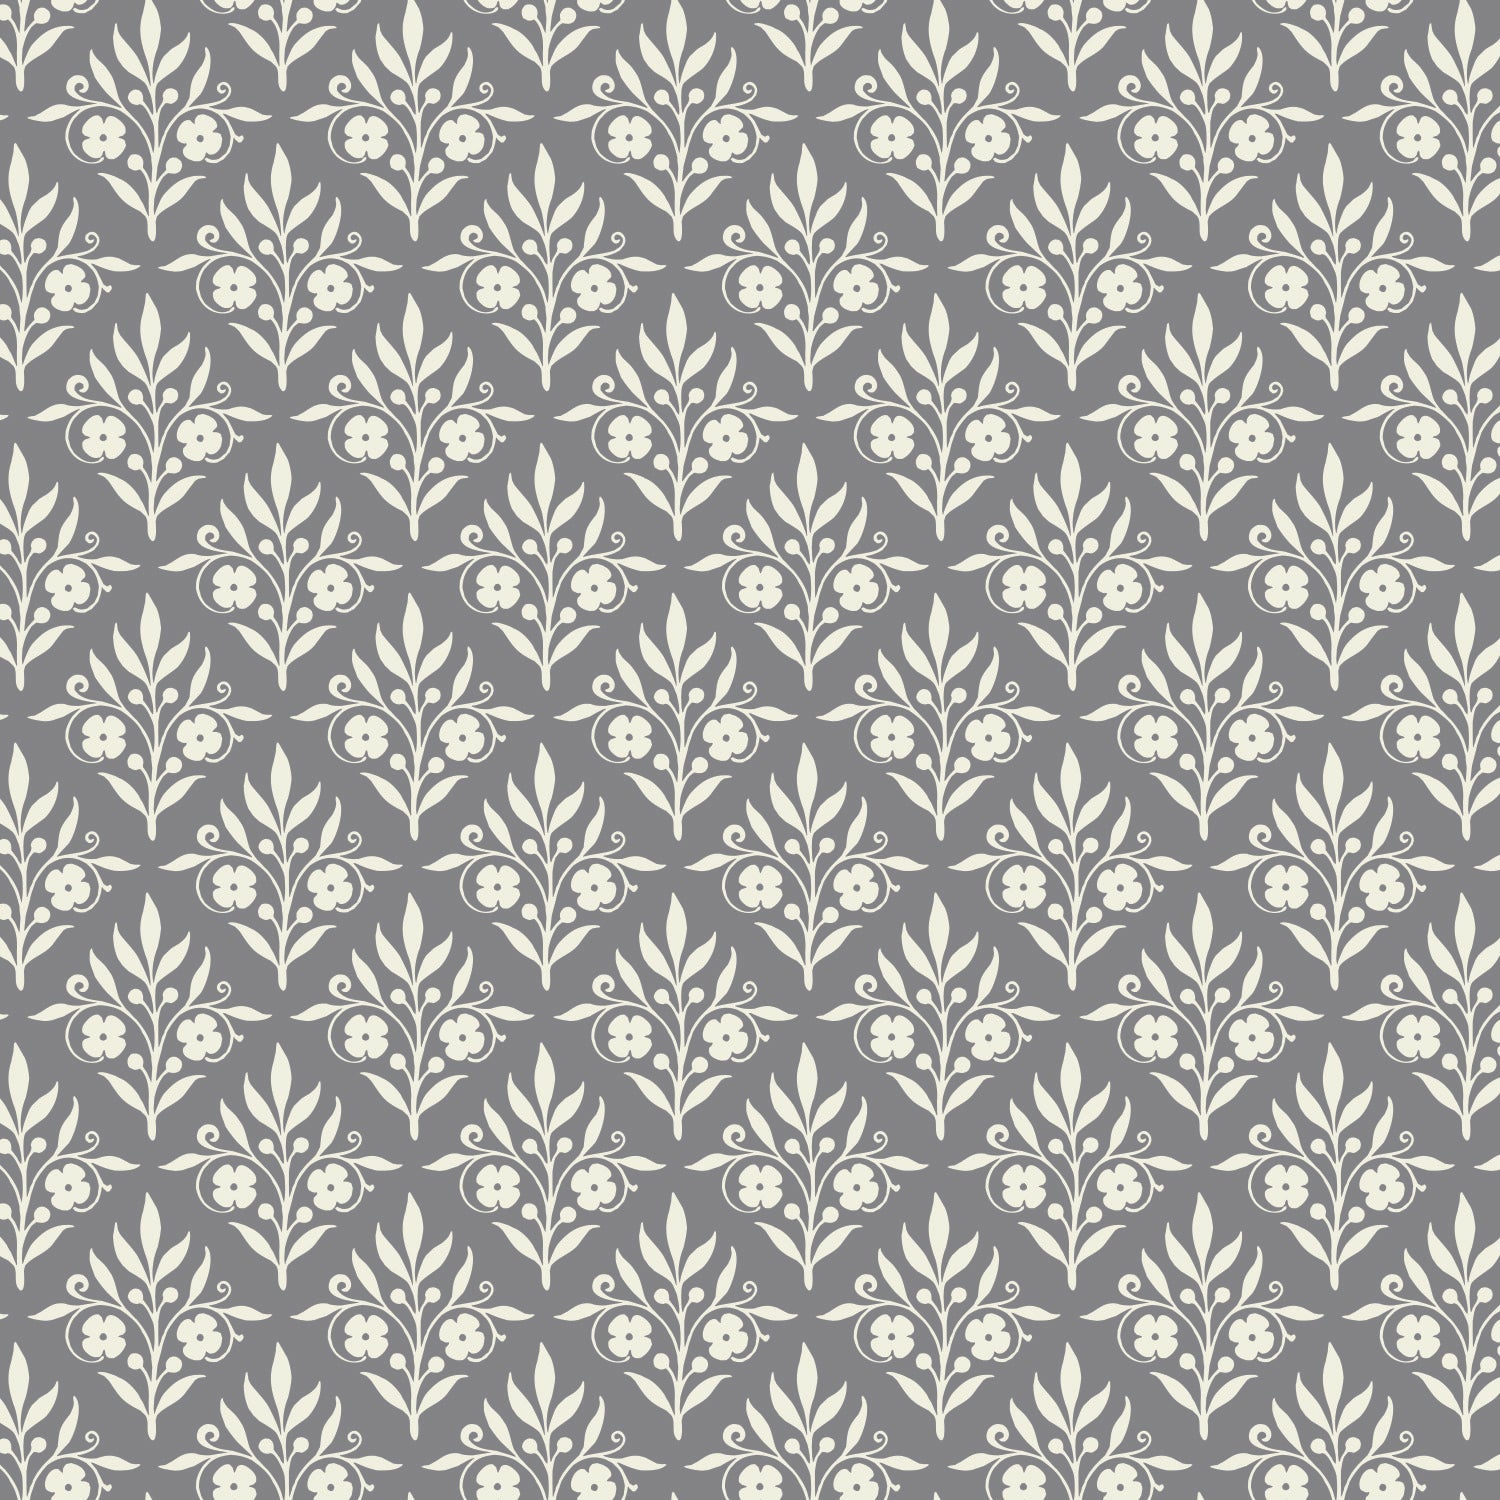 With Love Collection -Jackie McFee -Sweet Scrolls- Grey - Cotton